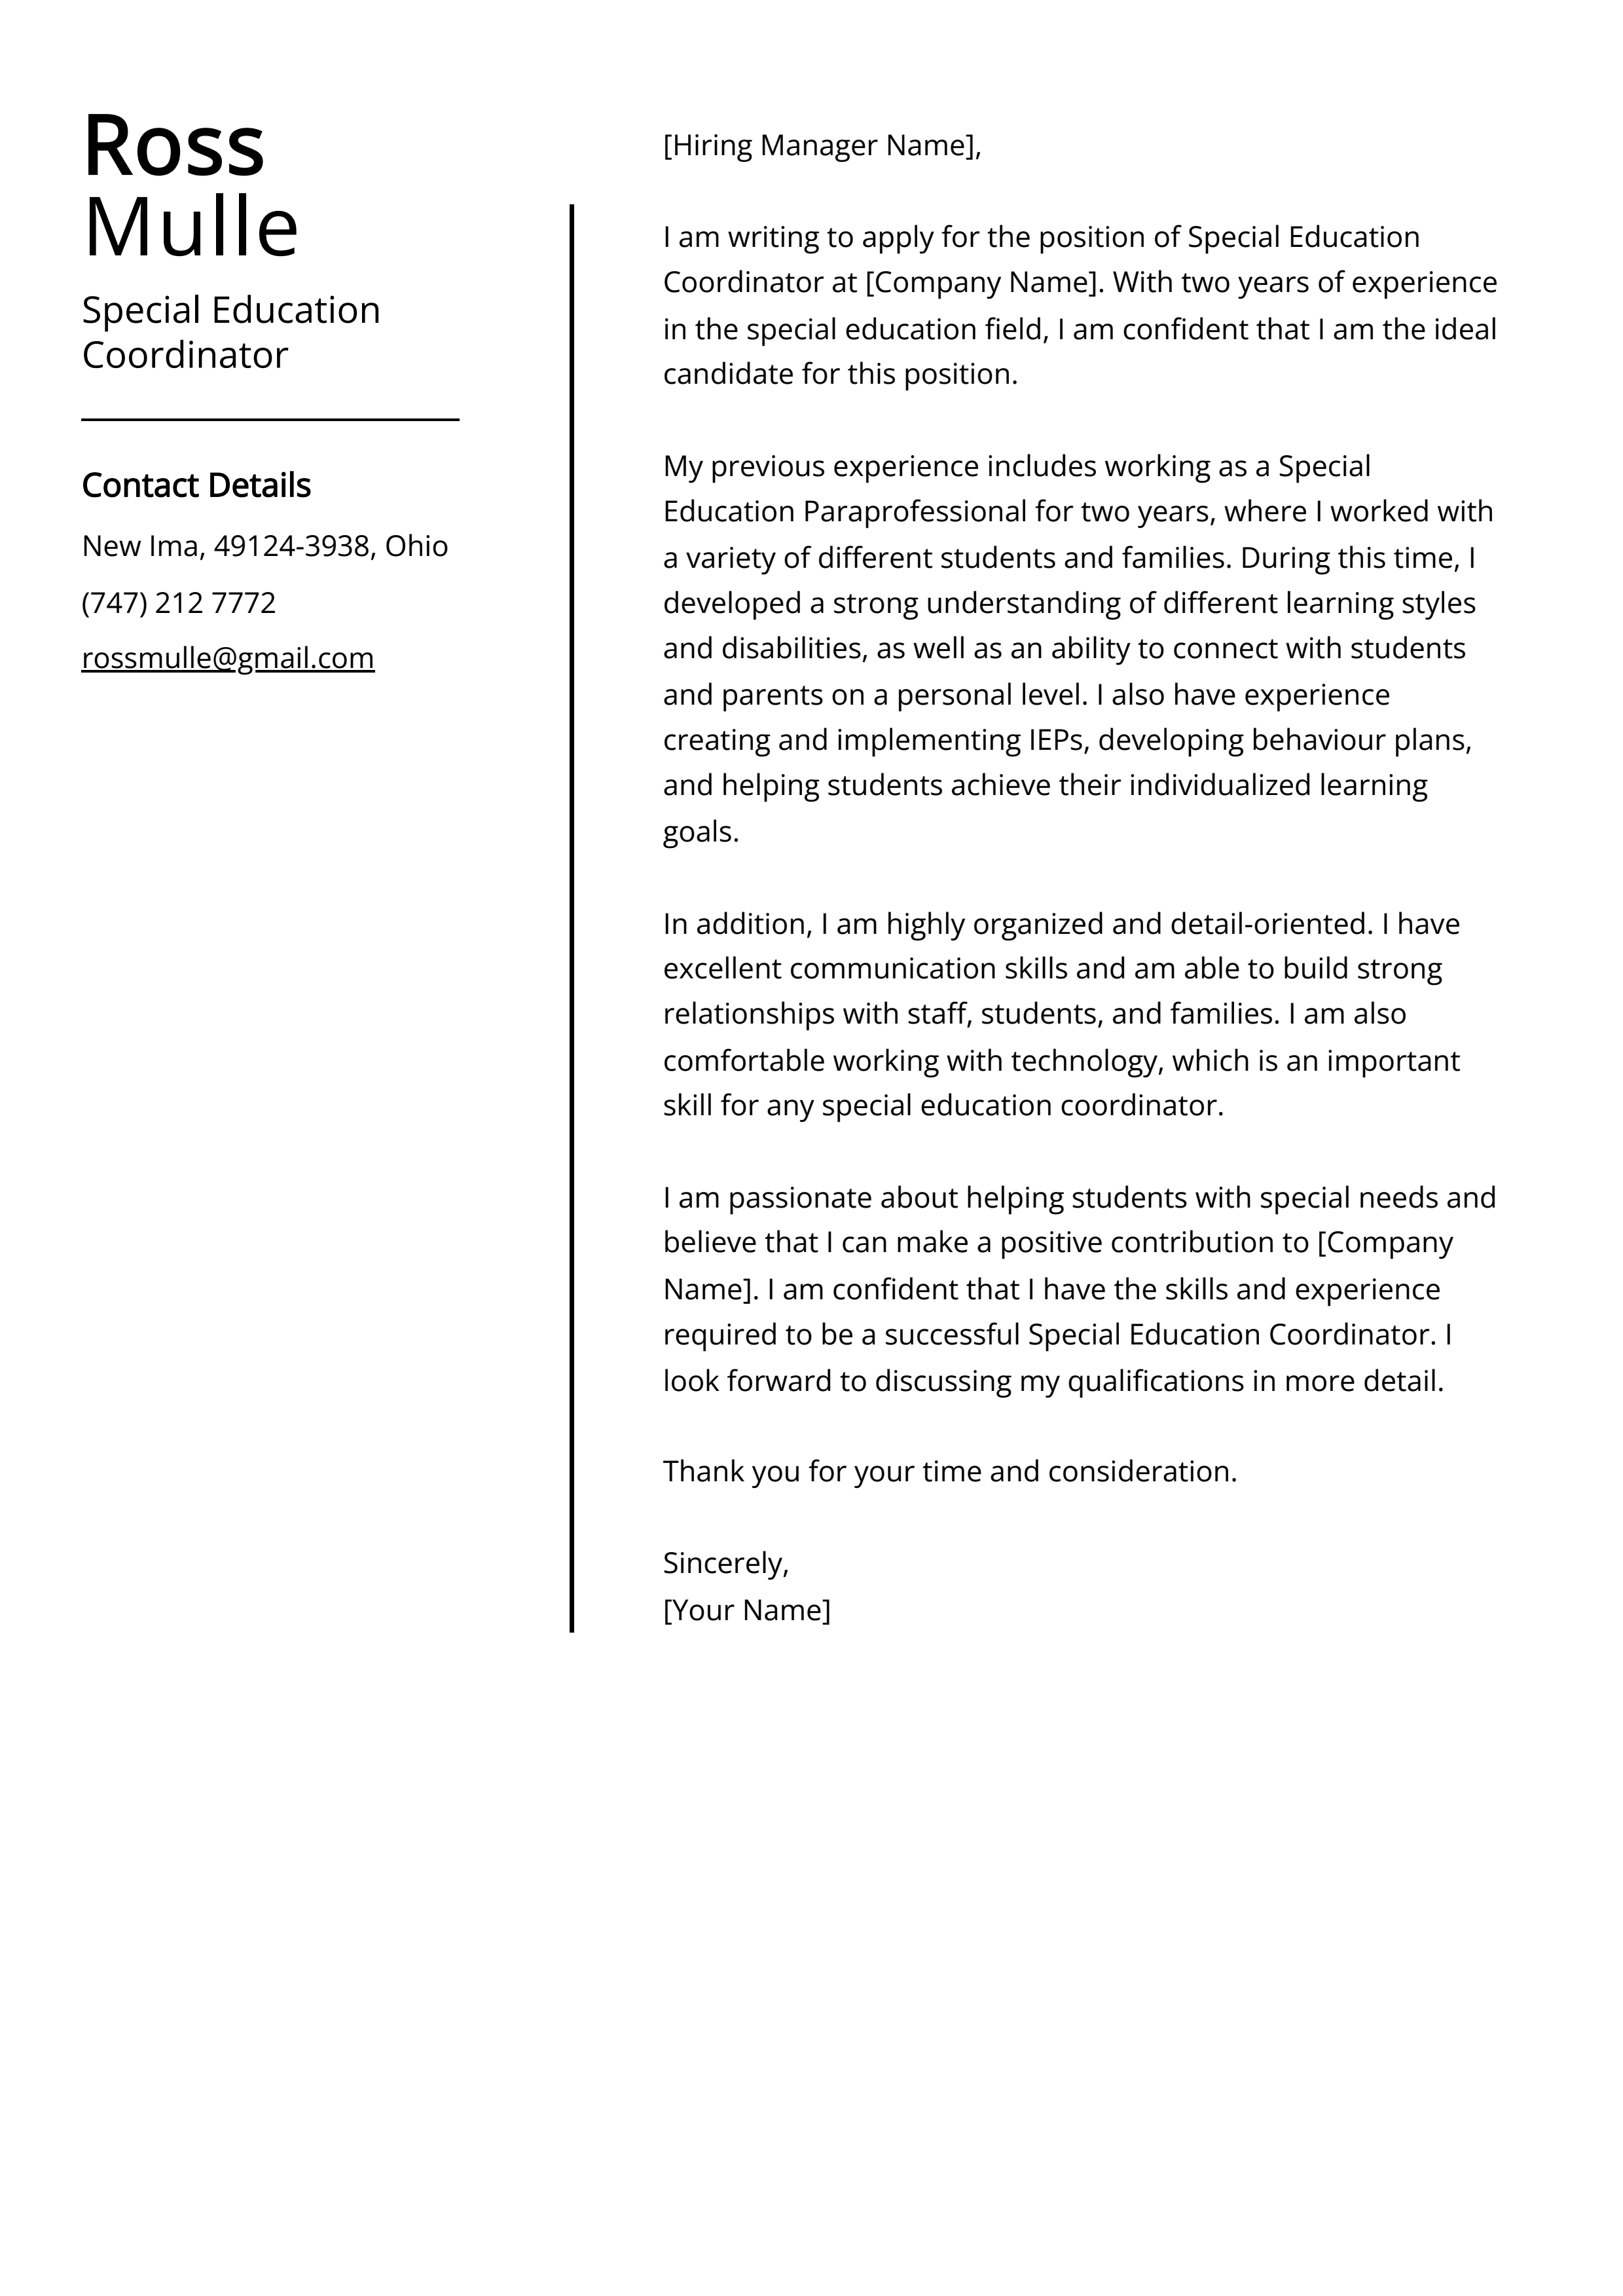 Special Education Coordinator Cover Letter Example